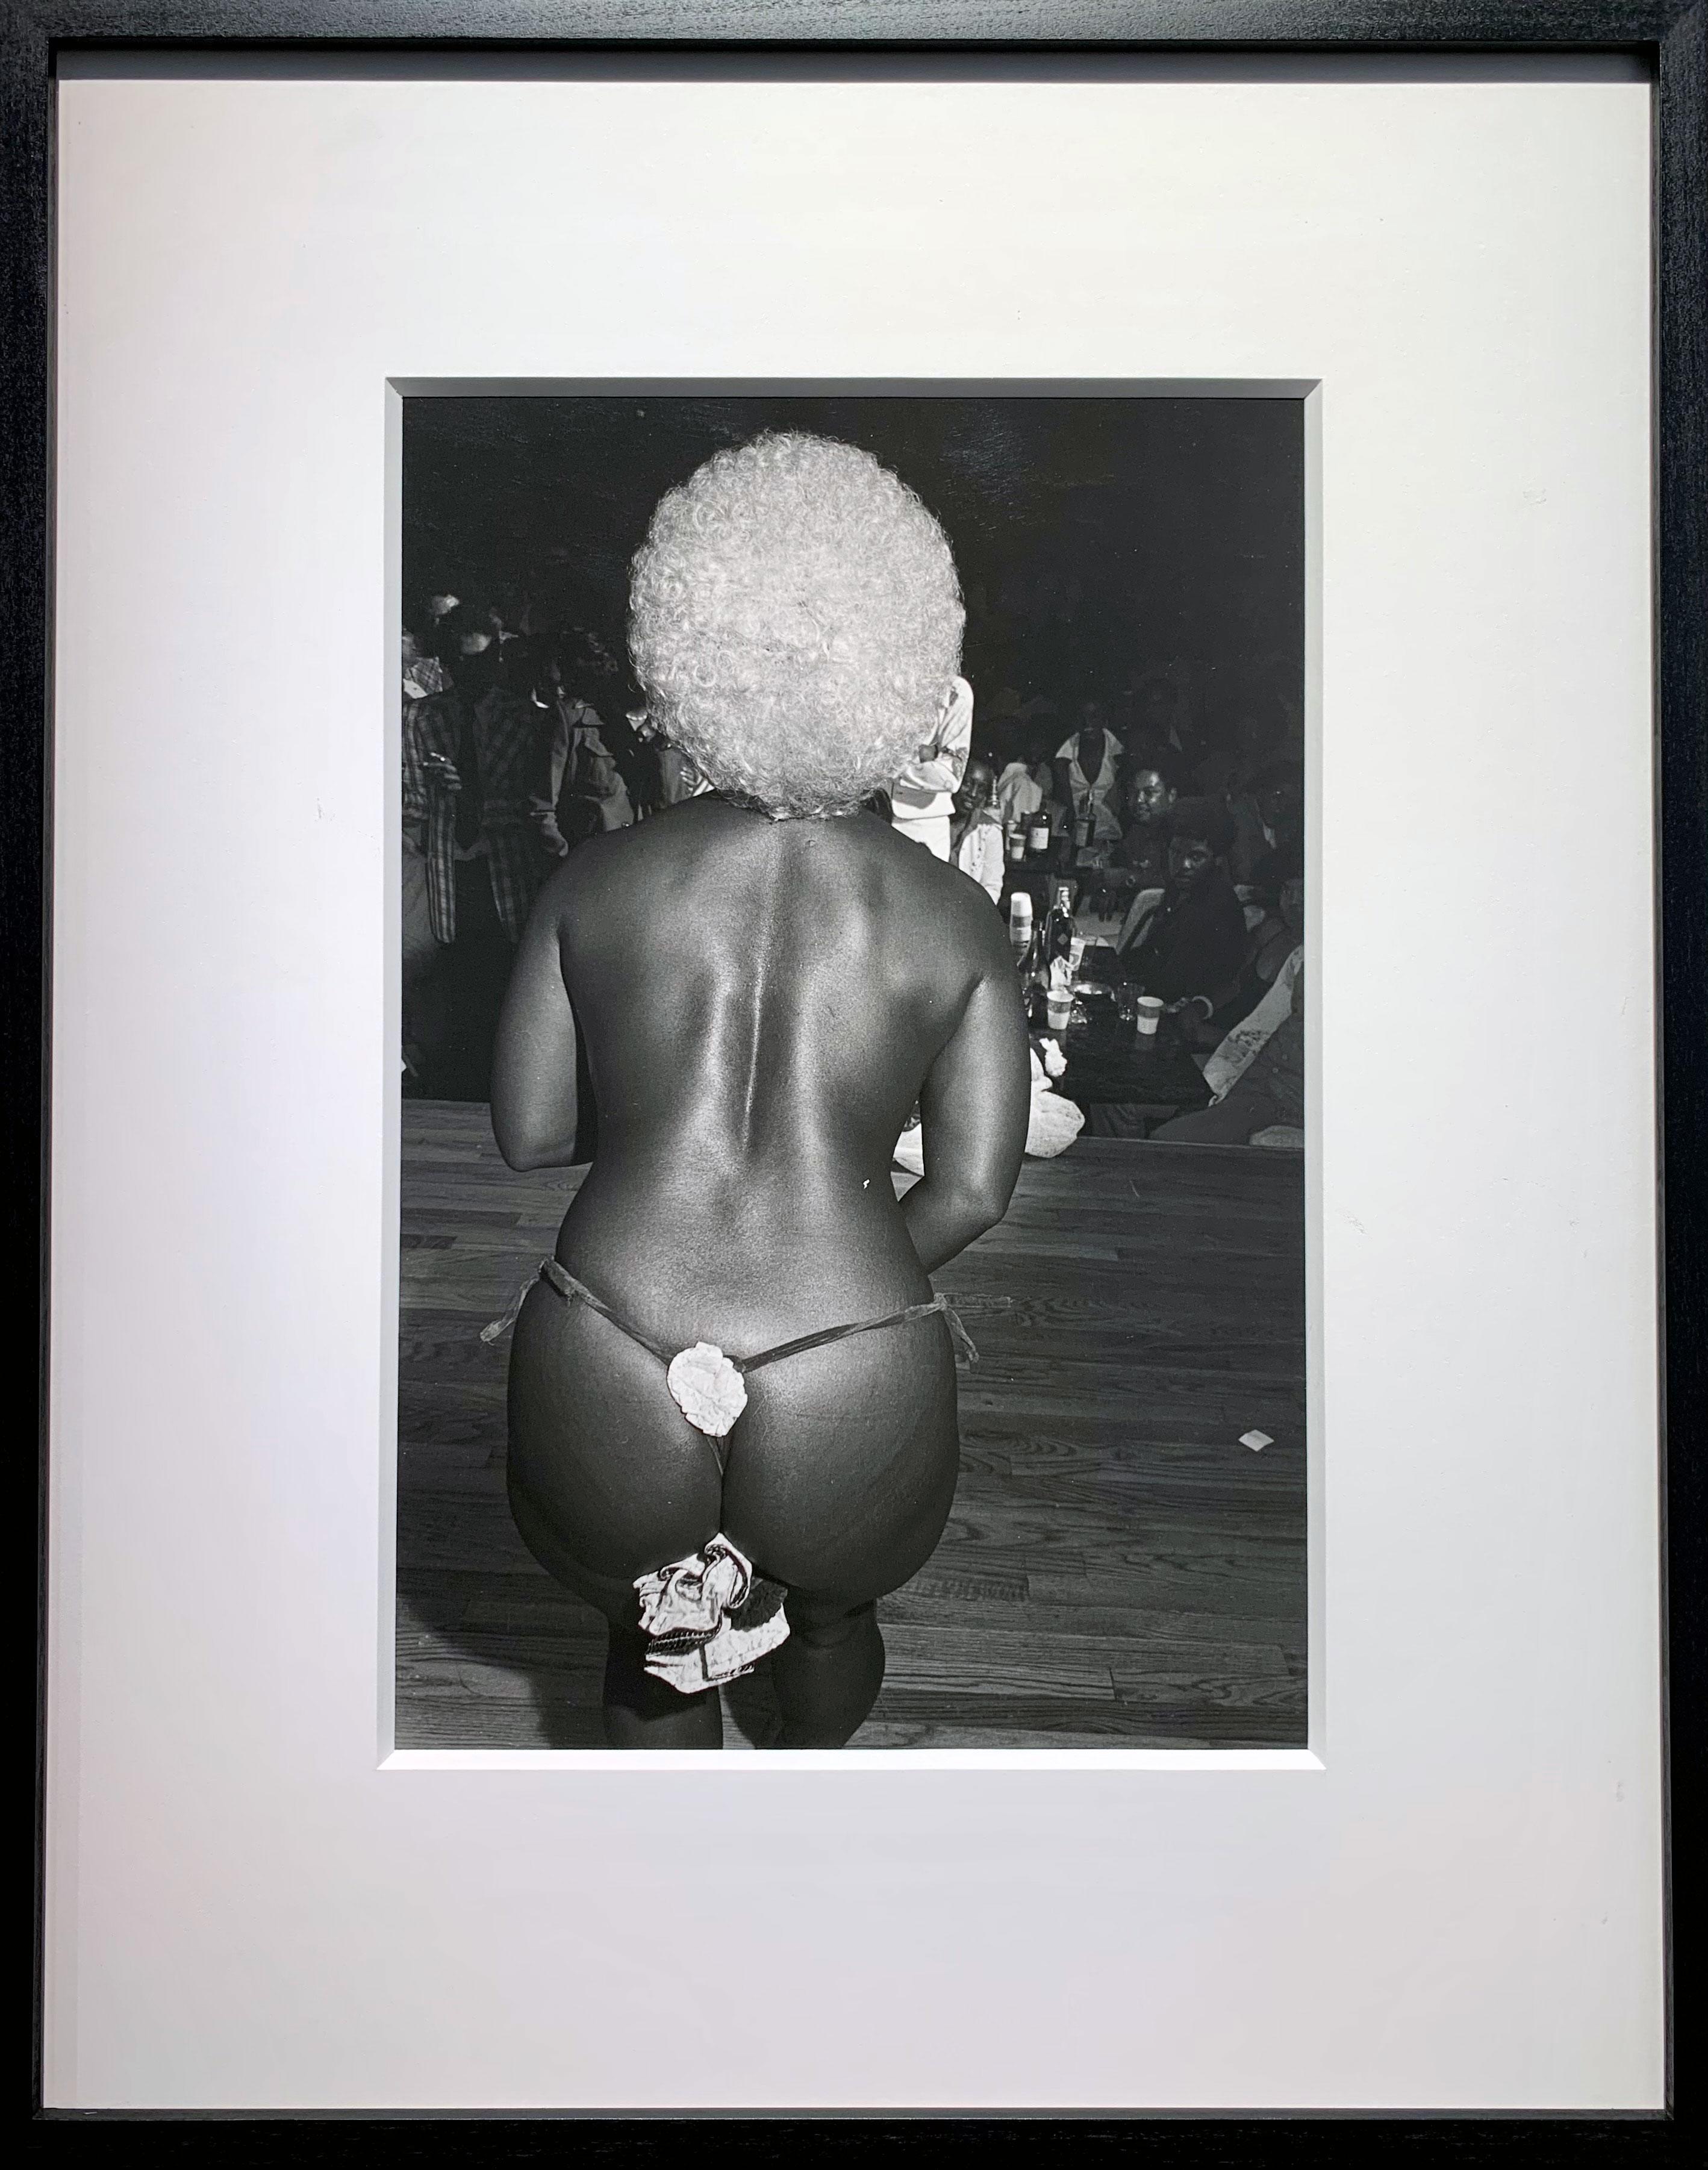 1970s Nightclubs of Chicago South Side - Black woman striptease dancer  - Photograph by Michael L Abramson